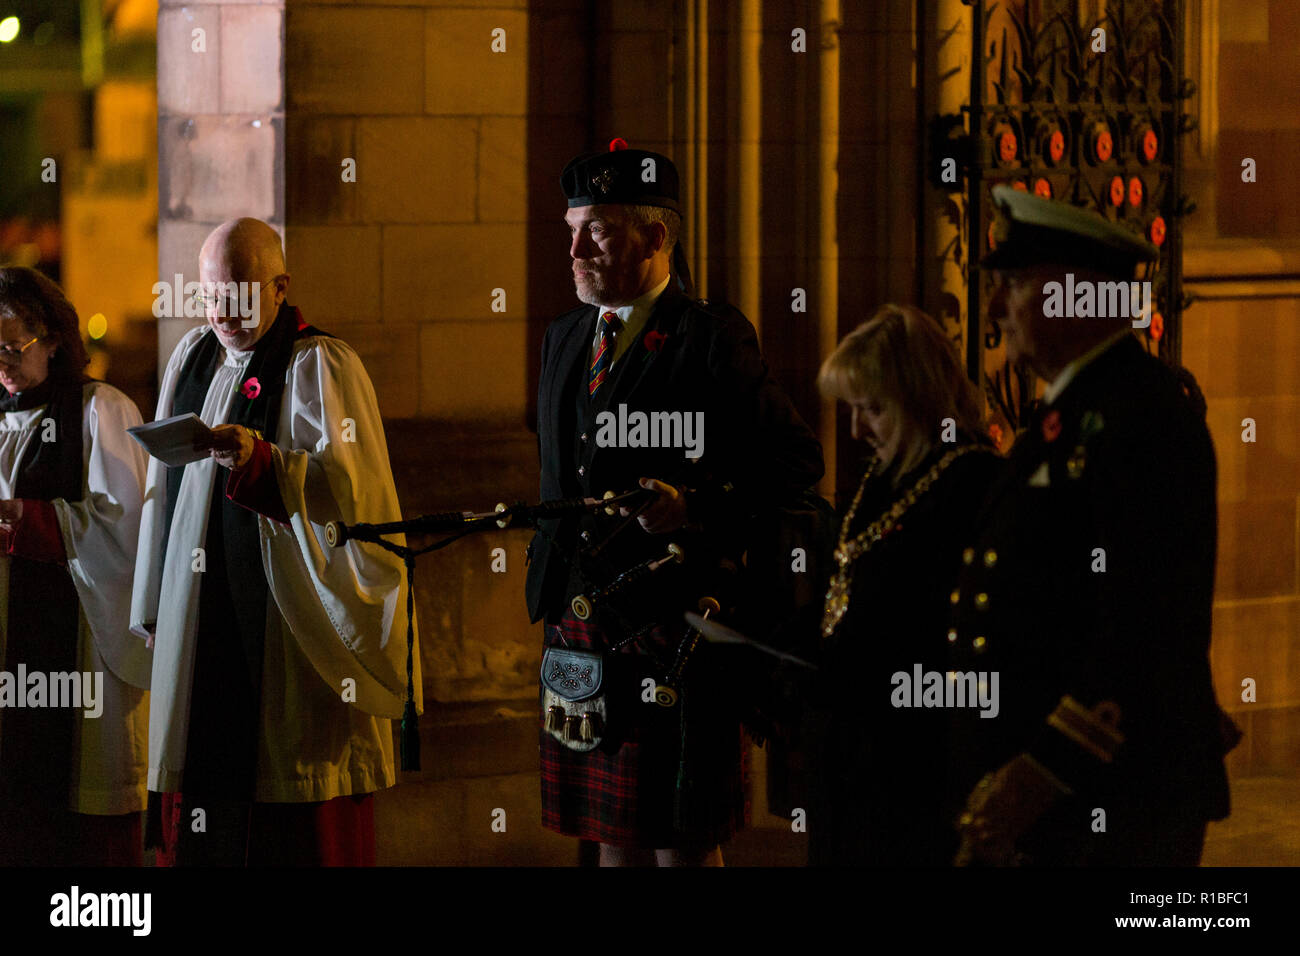 Manchester , England , 11th November 2018  Armistice Day in Manchester. Today (Sunday 11 November) marks 100 years since the end of the First World War. At 6 a.m. a lone piper plays the traditional Scottish lament, Battle O'er, outside Manchester Cathedral to herald the start of commemorations. Canon David Holgate ,acting Dean of Manchester Cathedral  is pictured after the lament was played. Piper Neil Macdonald joined around 1,000 other pipers  across the UK and around the world playing at 6.00 a.m. Credit: Chris Bull/Alamy Live News. Stock Photo